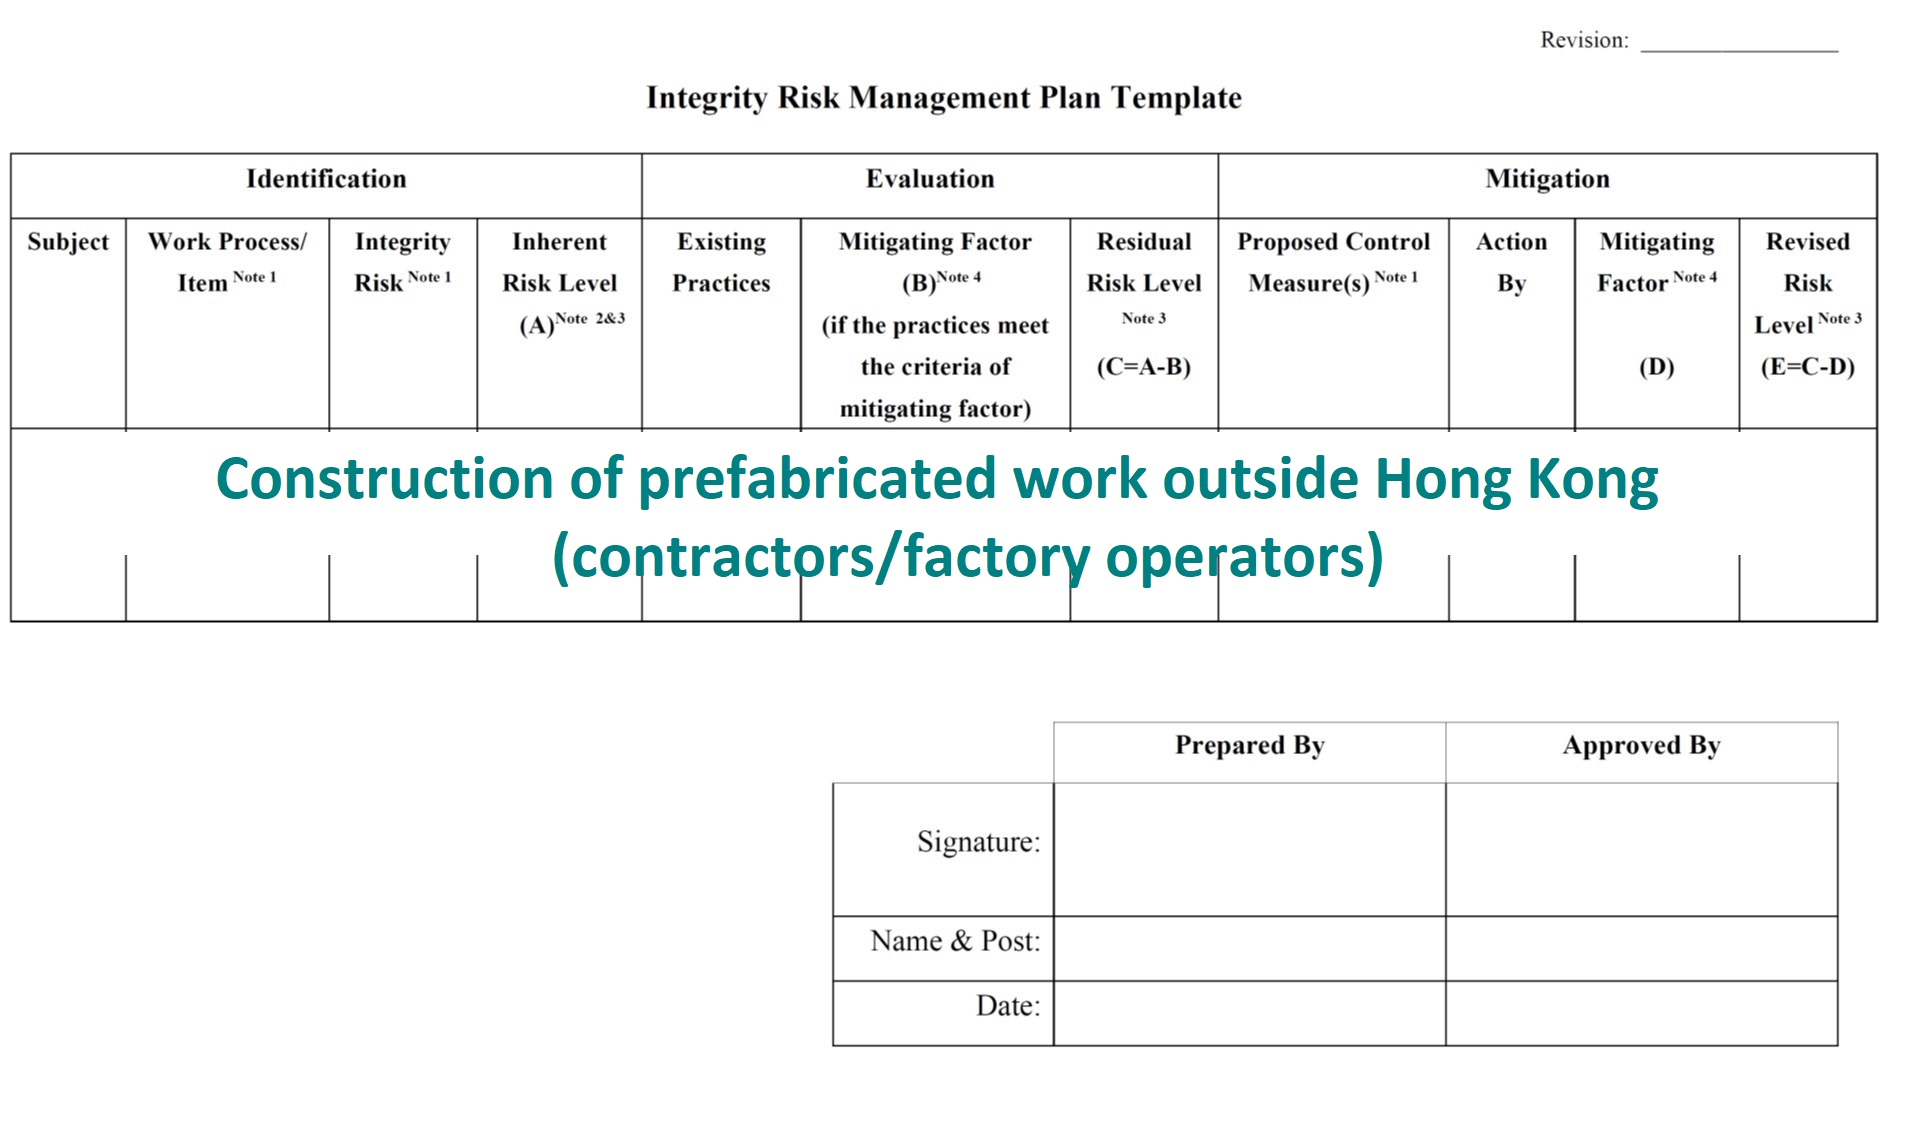 Integrity Risk Management on Construction of Prefabricated Work outside Hong Kong (For Contractors / Factory Operators)